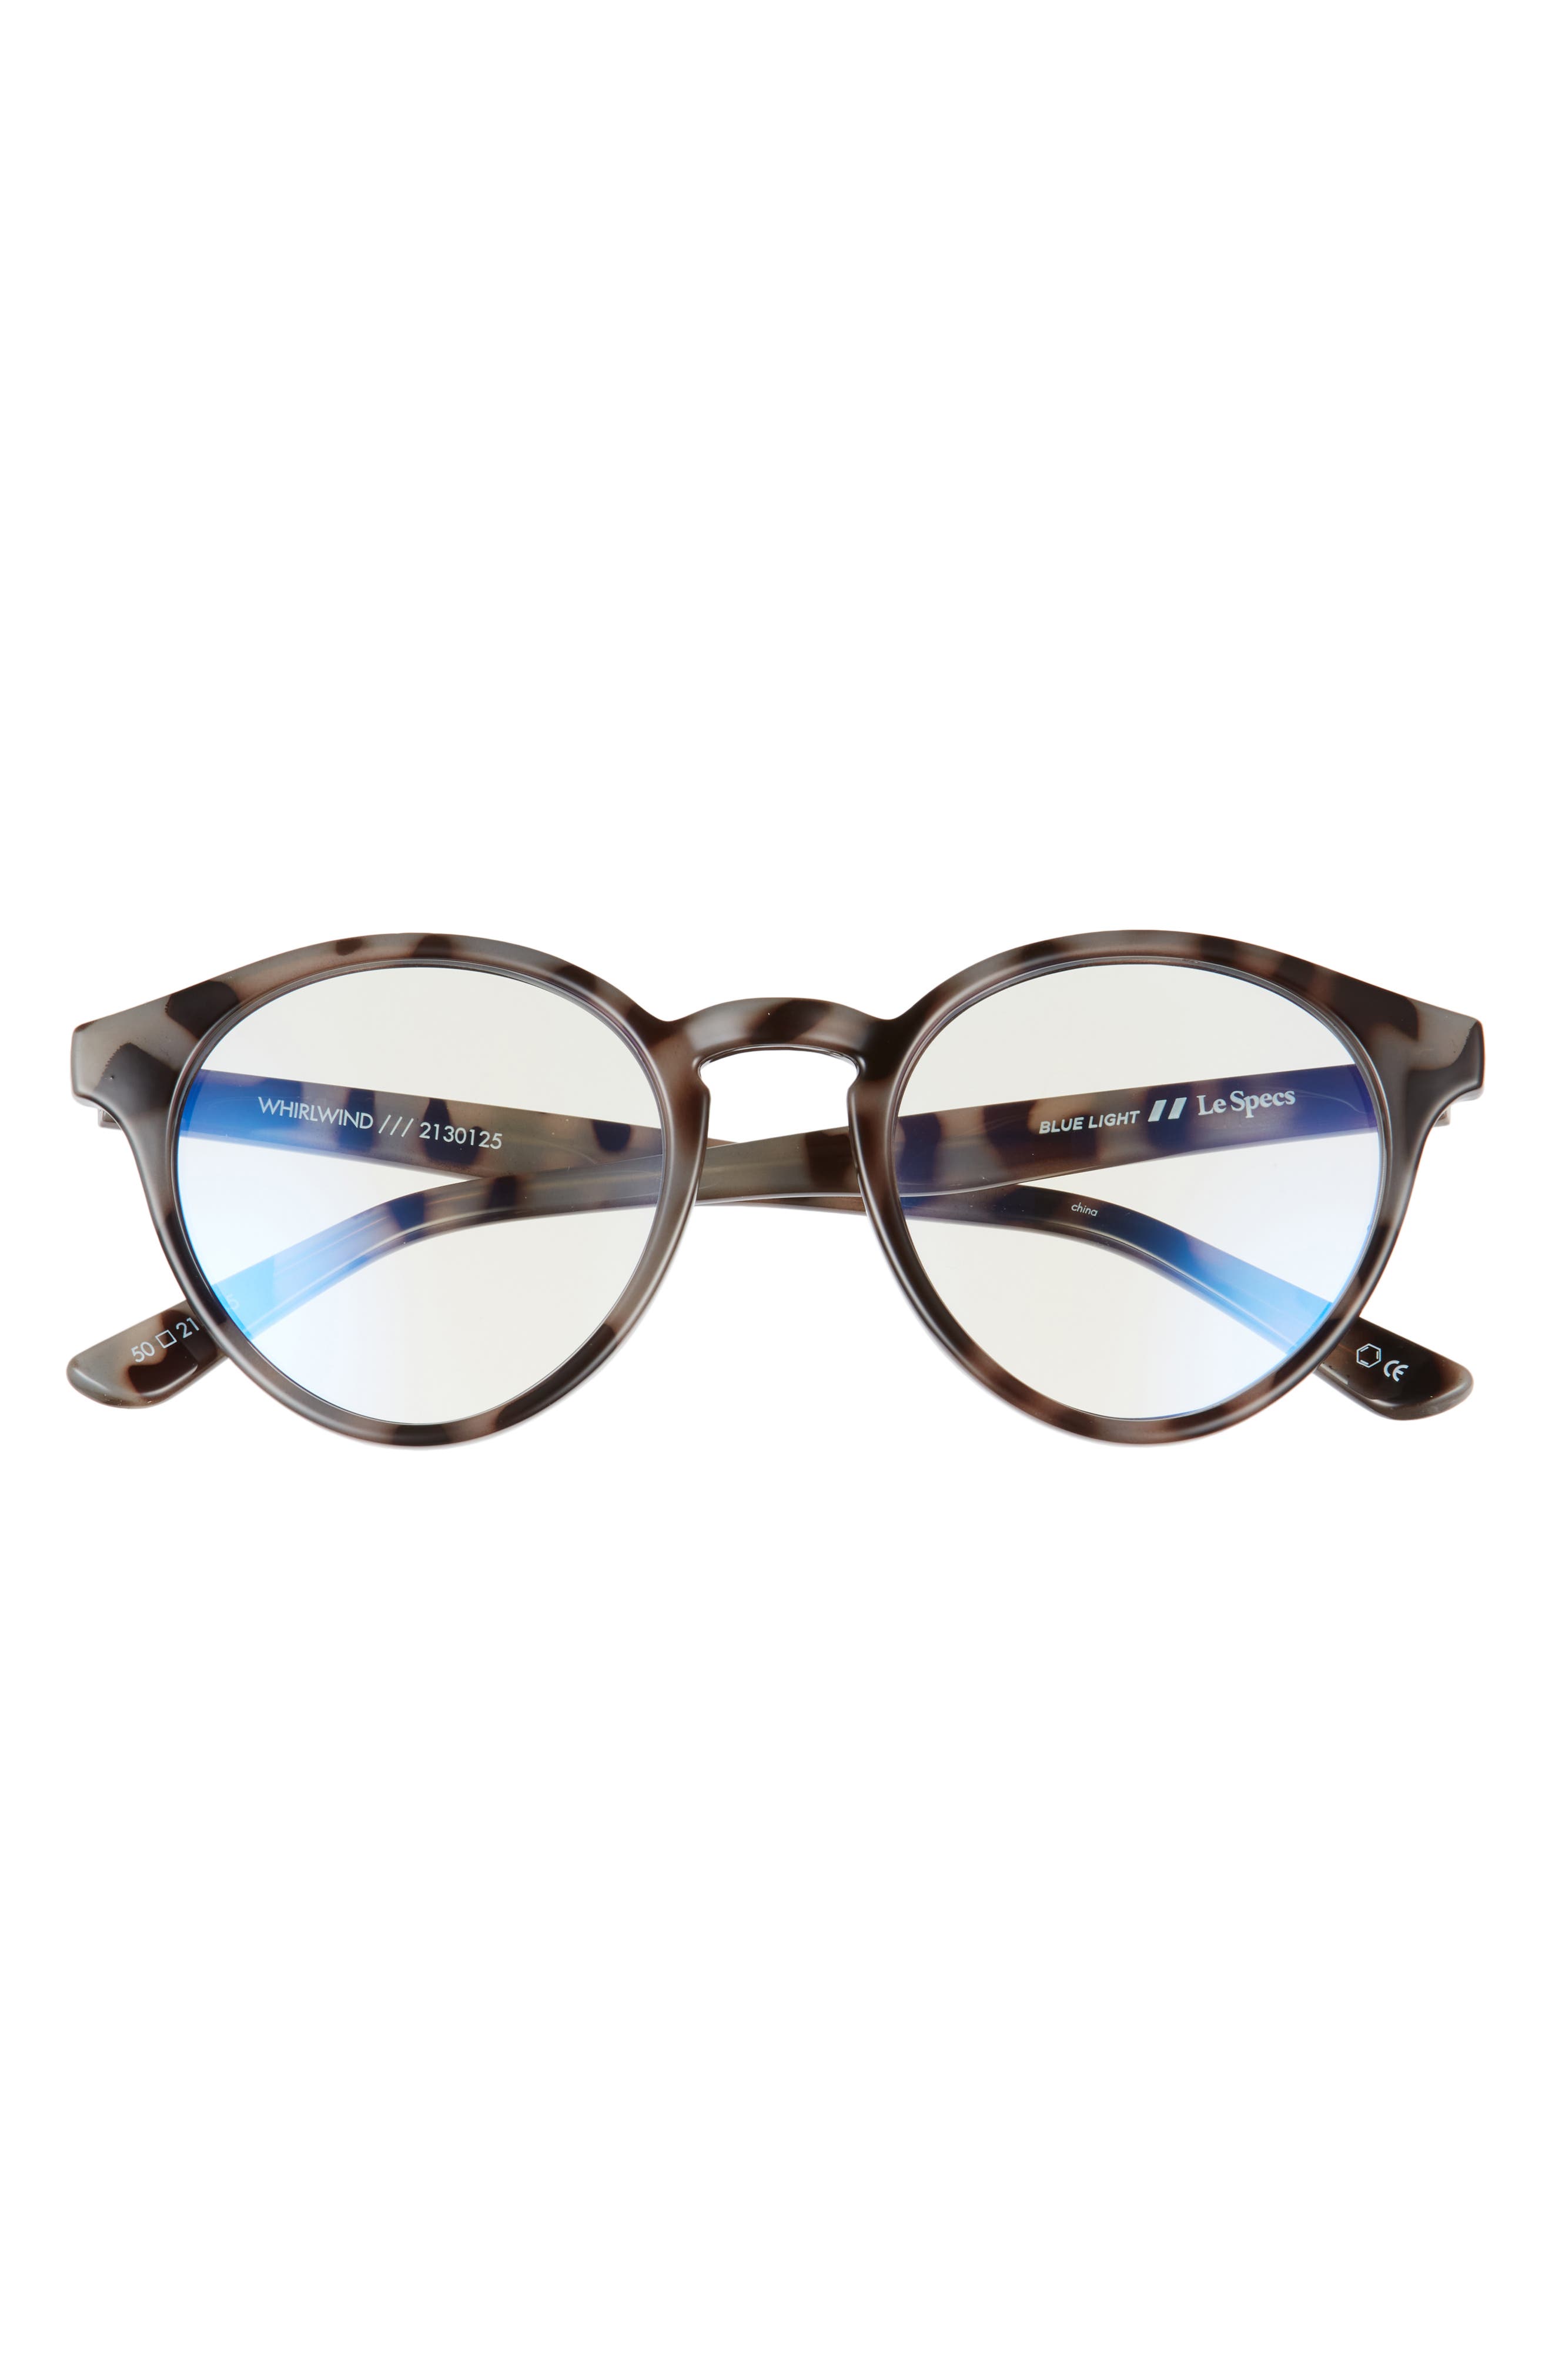 Le Specs Whirlwind 48mm Small Blue Light Blocking Glasses in Coal Tort/Anti Blue Light at Nordstrom